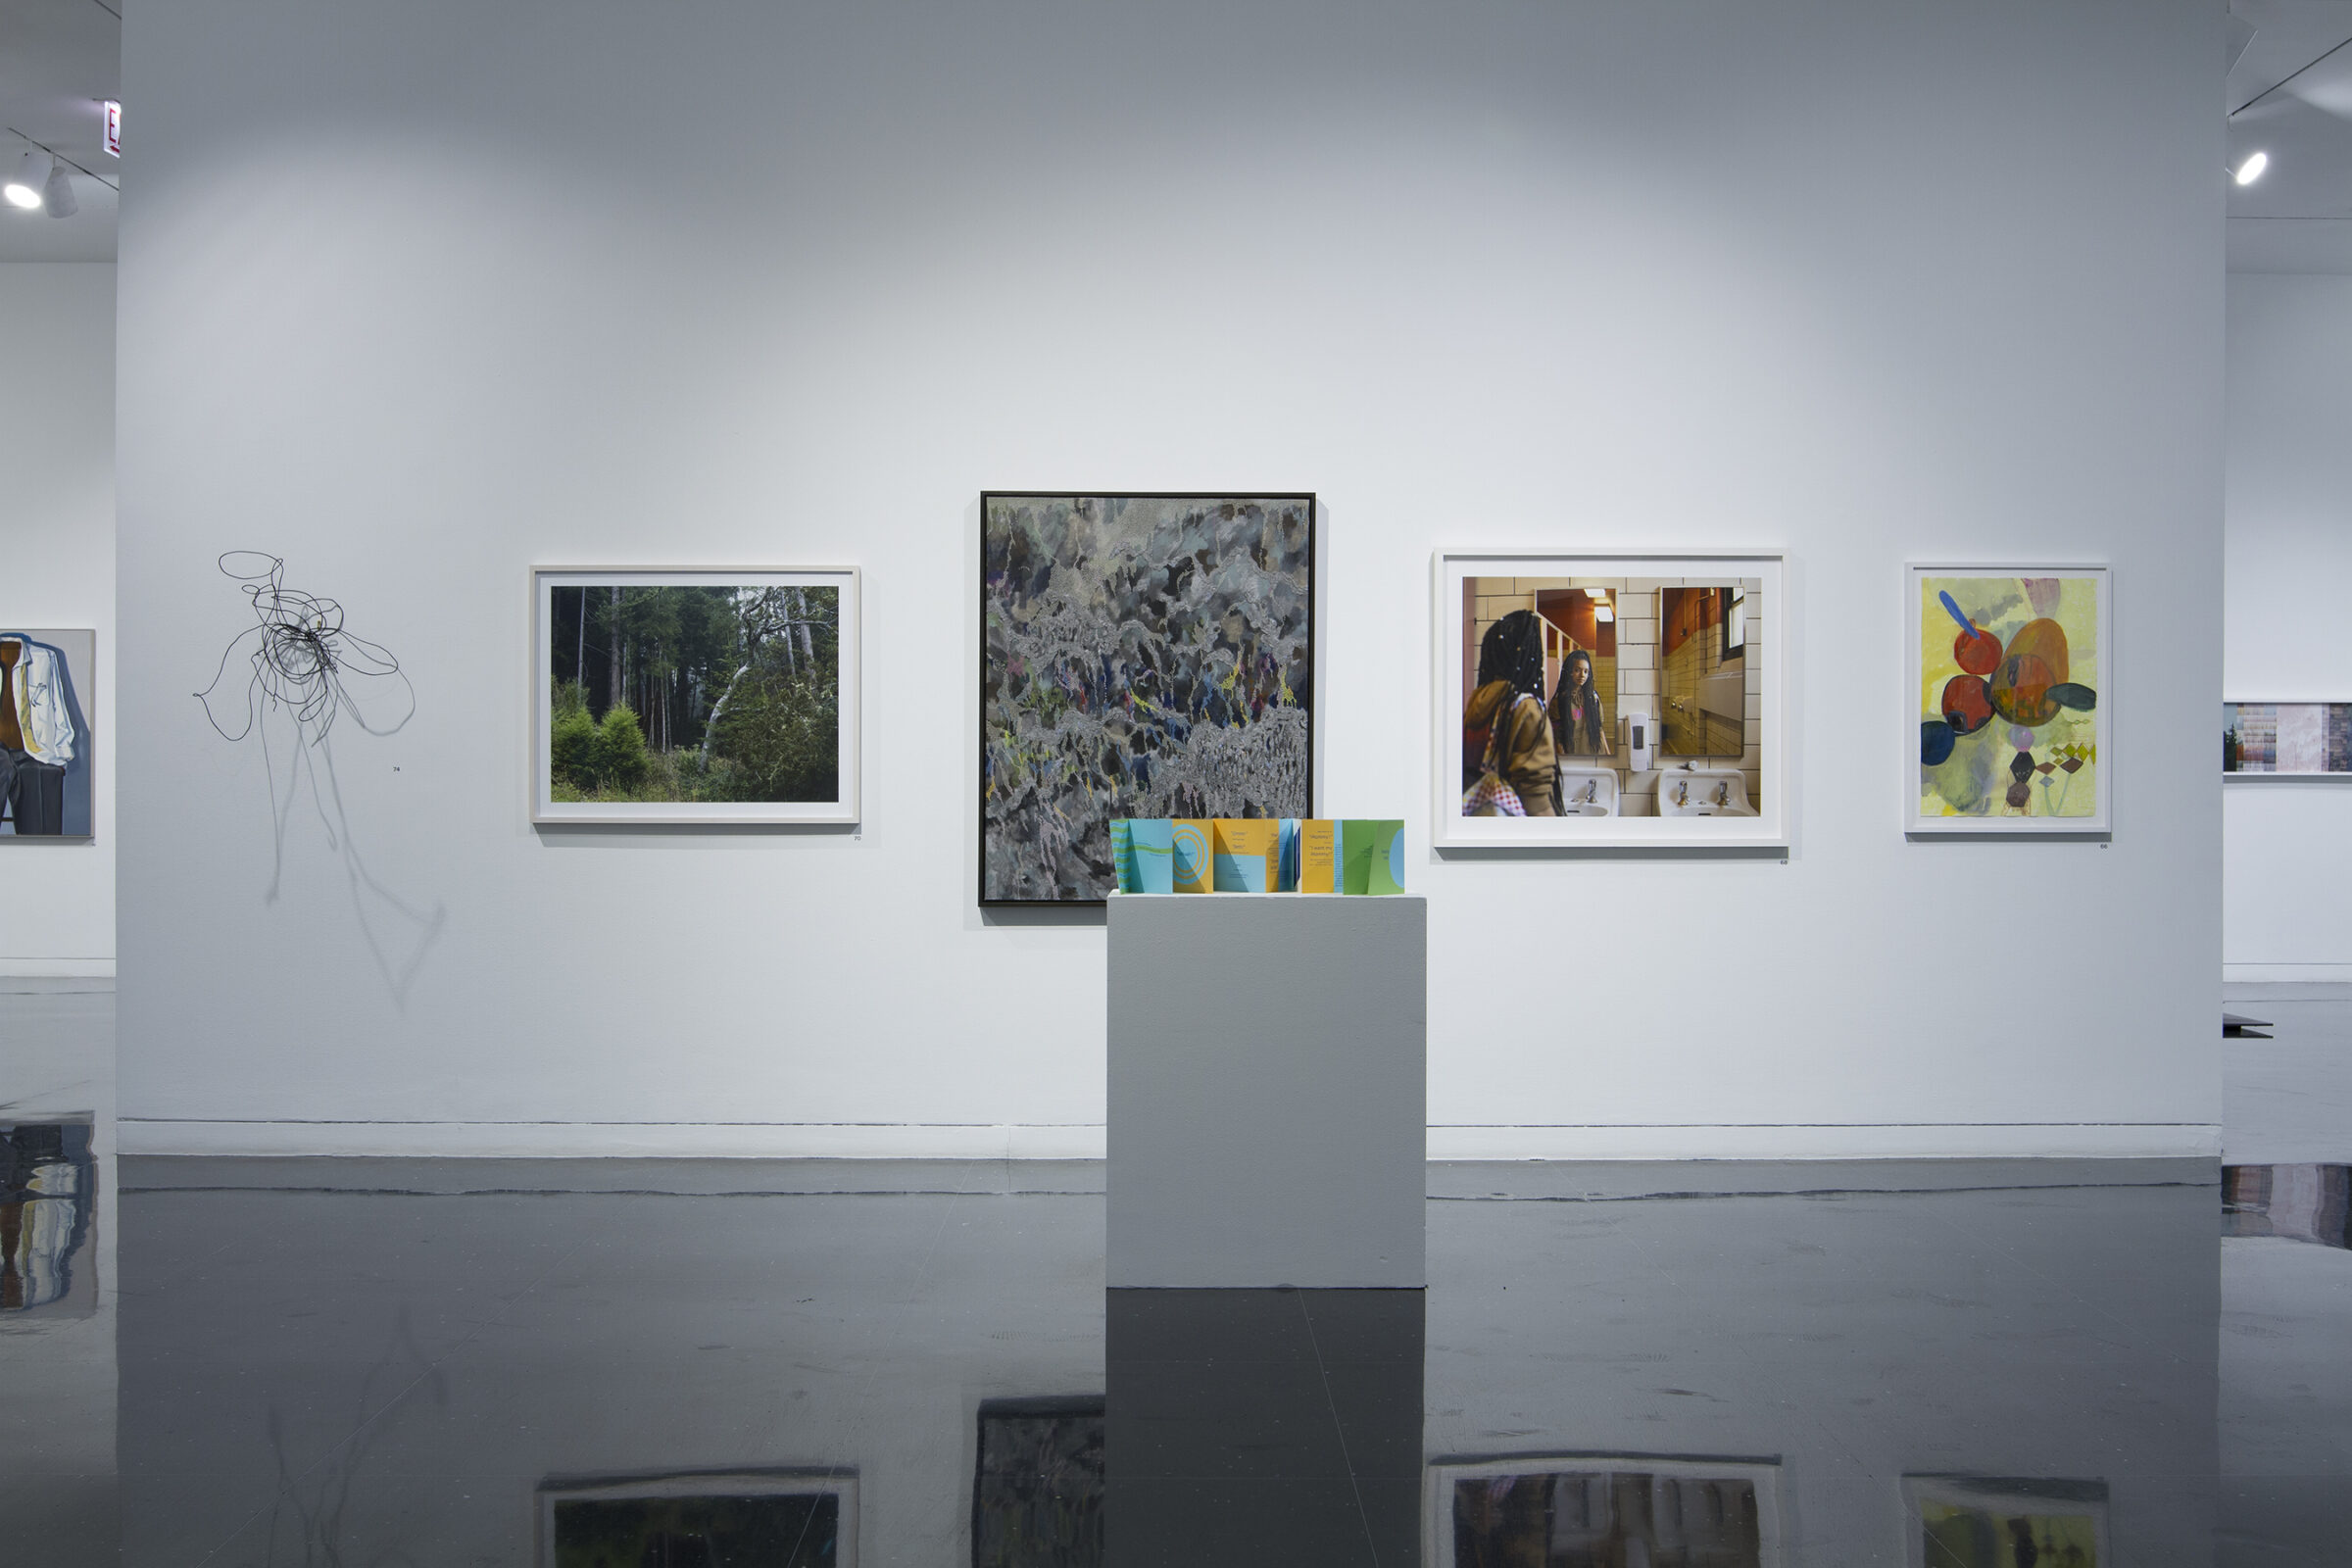 A white, freestanding gallery wall holds four framed artworks arranged horizontally and one abstract wire sculpture resembling a tangle or nest on the far left side. In front of the wall stands a paper, accordion-folded pamphlet printed on green, blue, and golden yellow paper.